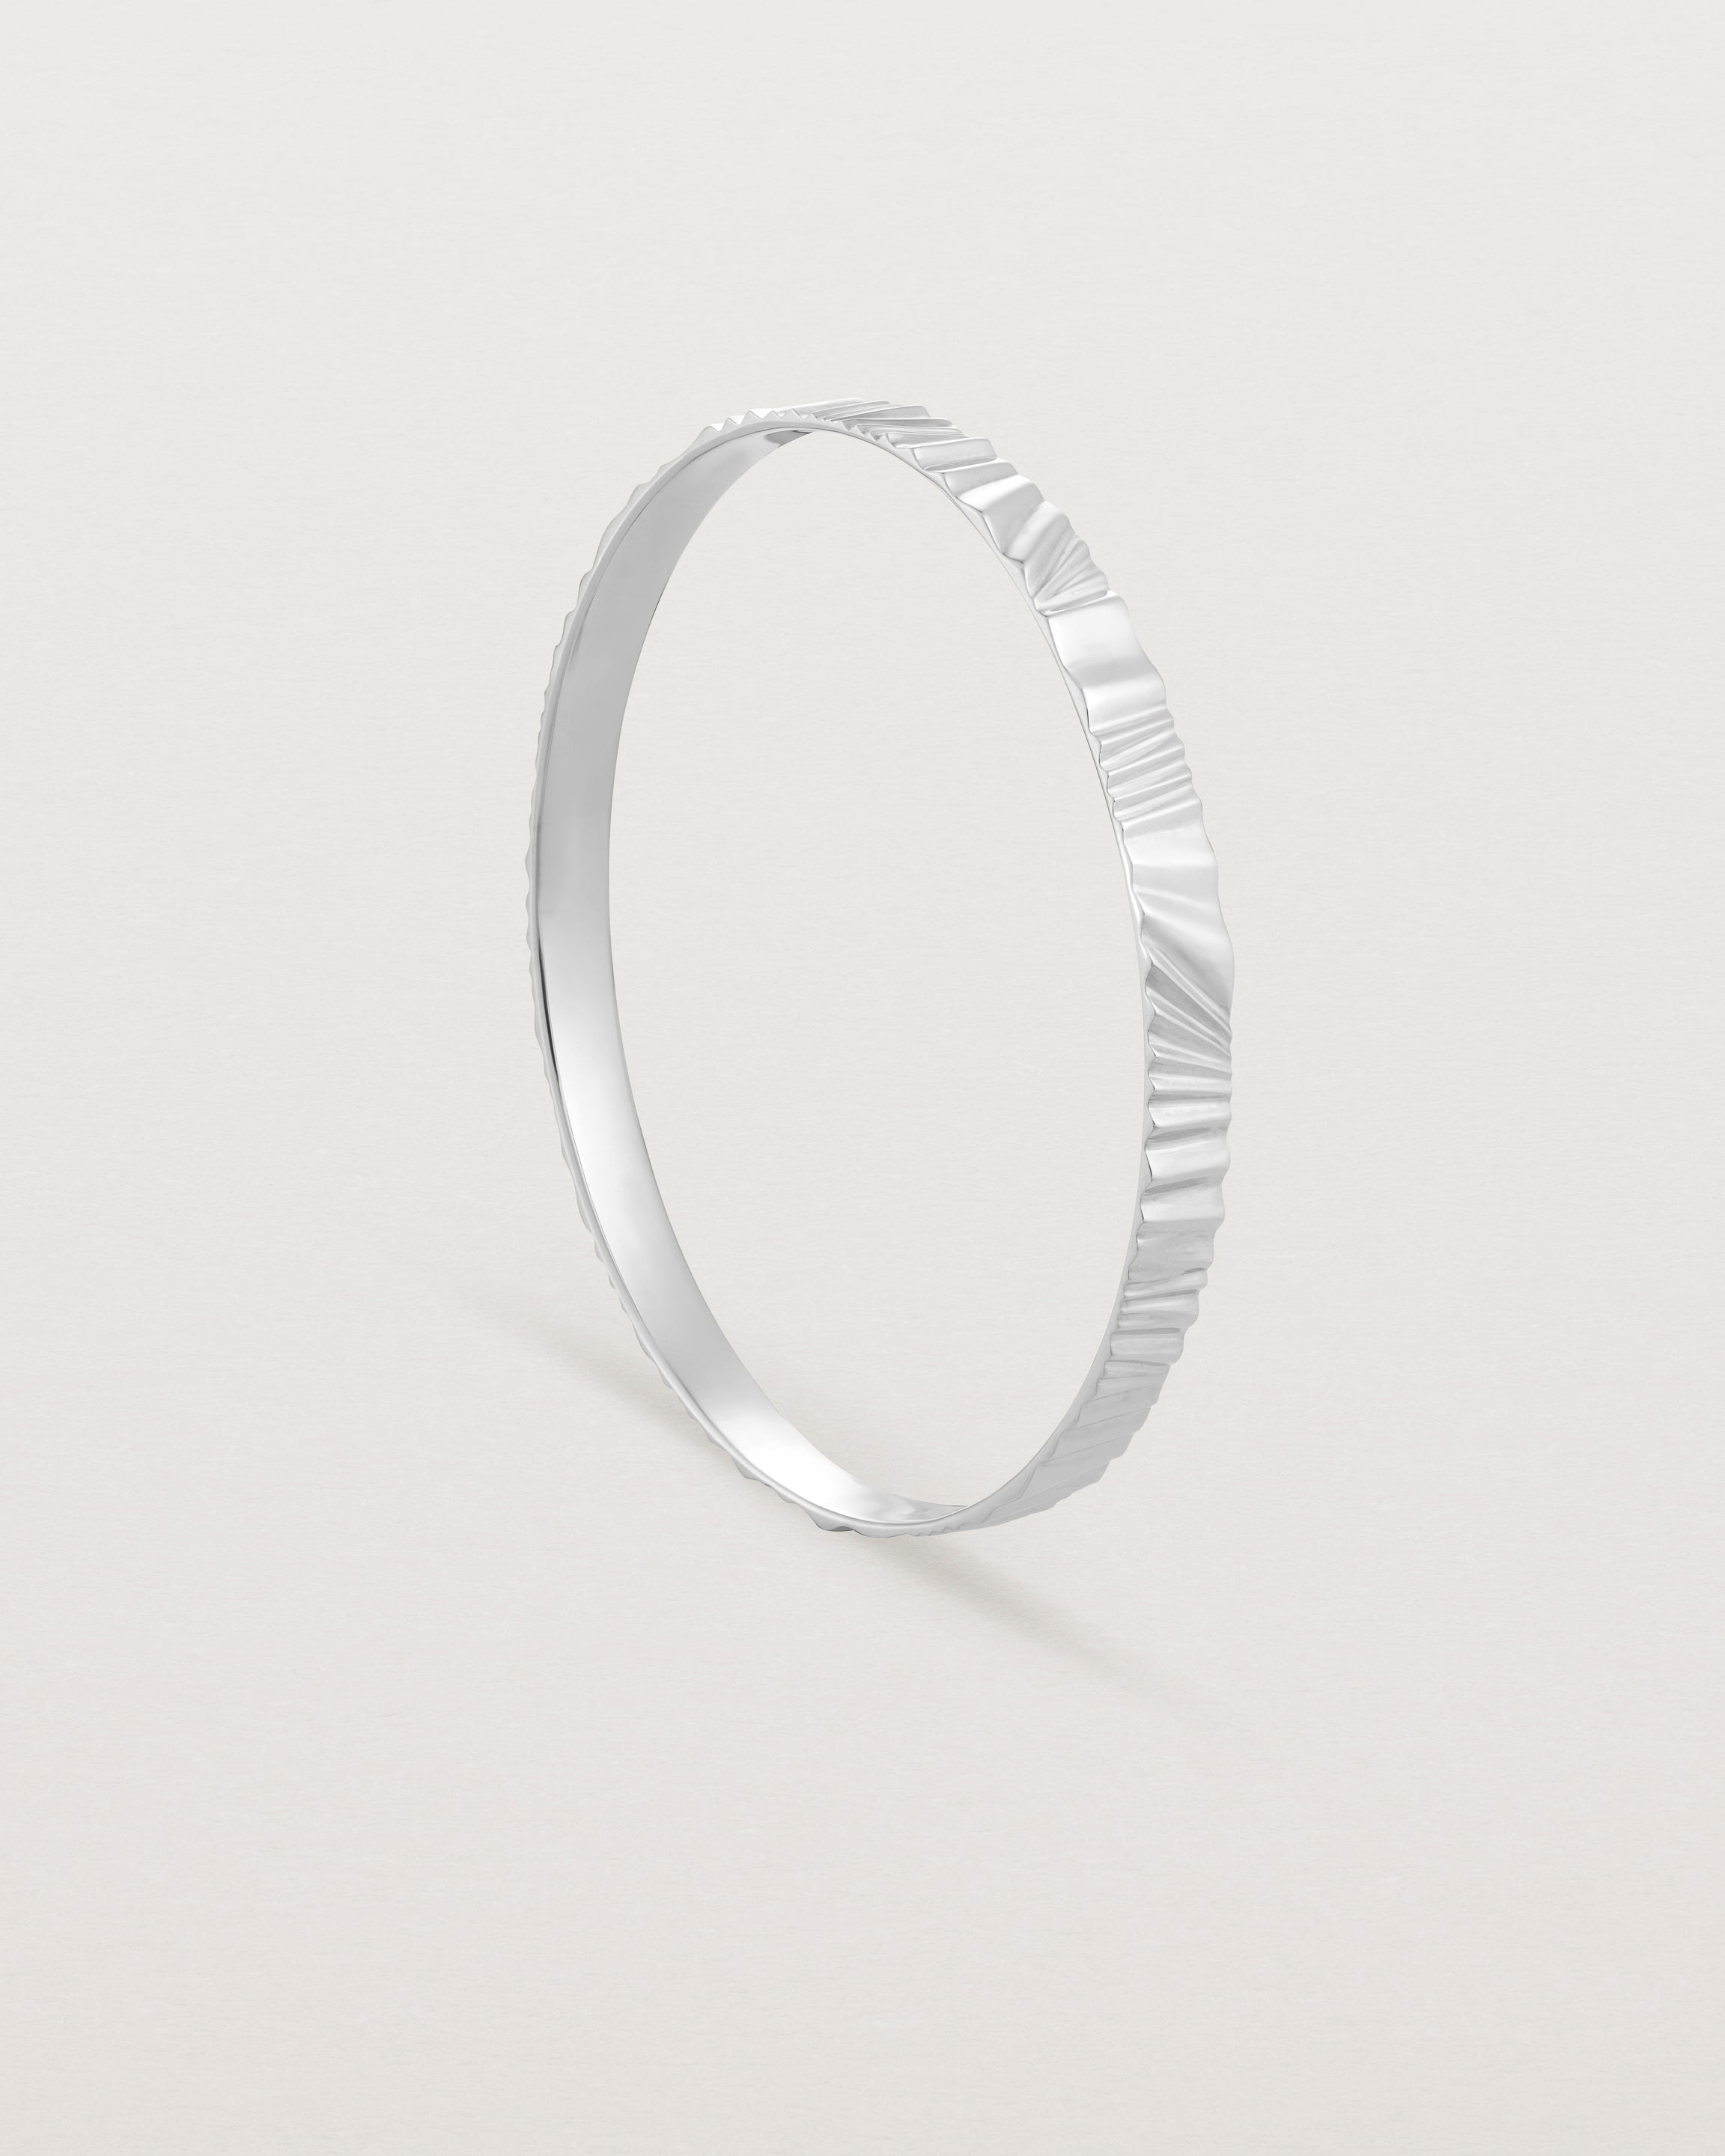 Standing view of the Pan Bangle in sterling silver.